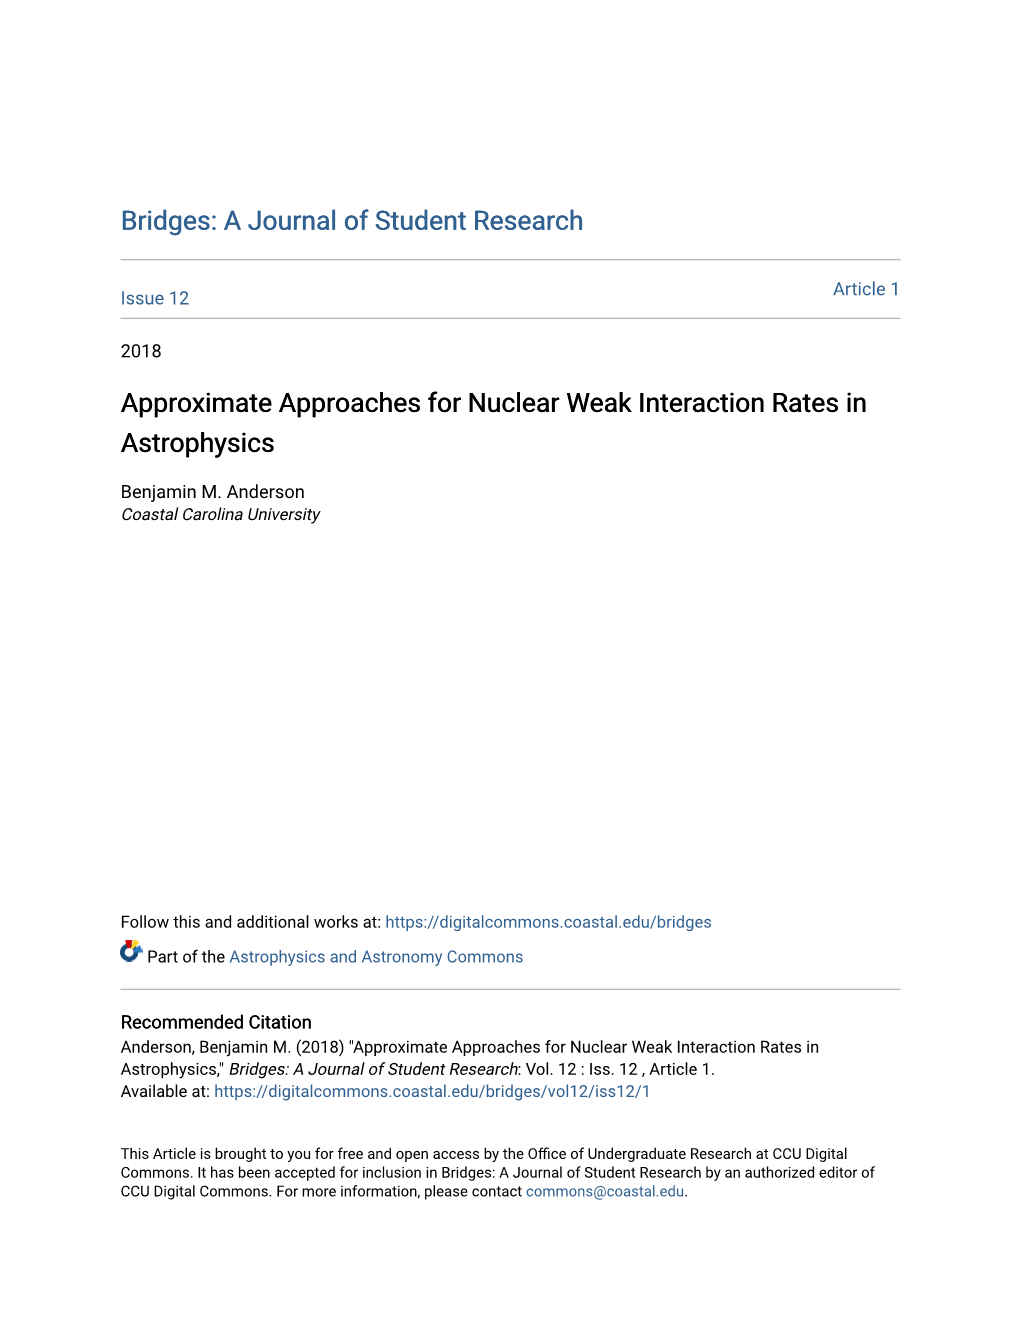 Approximate Approaches for Nuclear Weak Interaction Rates in Astrophysics